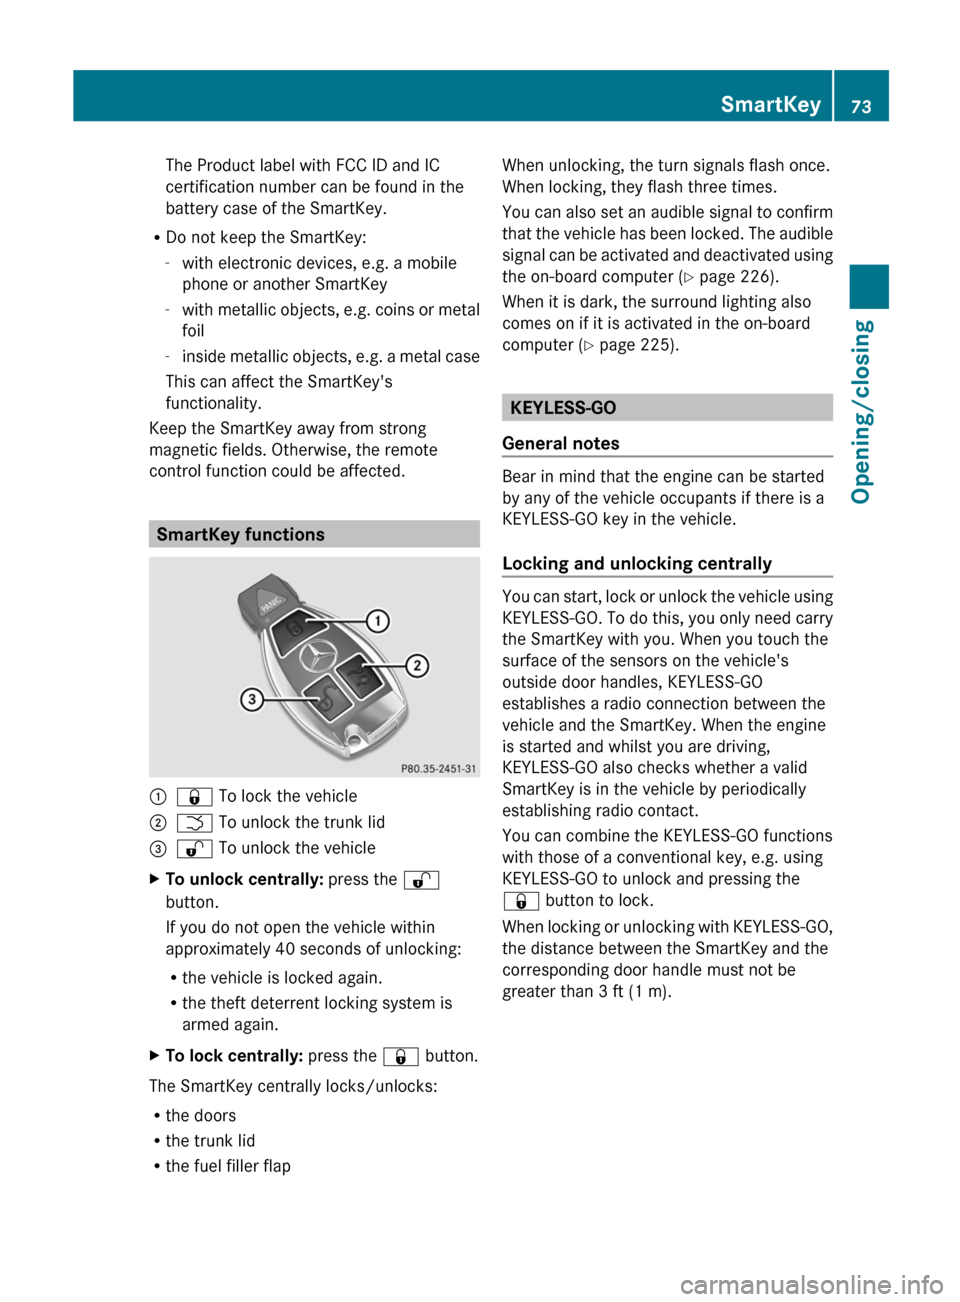 MERCEDES-BENZ E-Class CABRIOLET 2013 C207 User Guide The Product label with FCC ID and IC
certification number can be found in the
battery case of the SmartKey.
R Do not keep the SmartKey:
-with electronic devices, e.g. a mobile
phone or another SmartKe